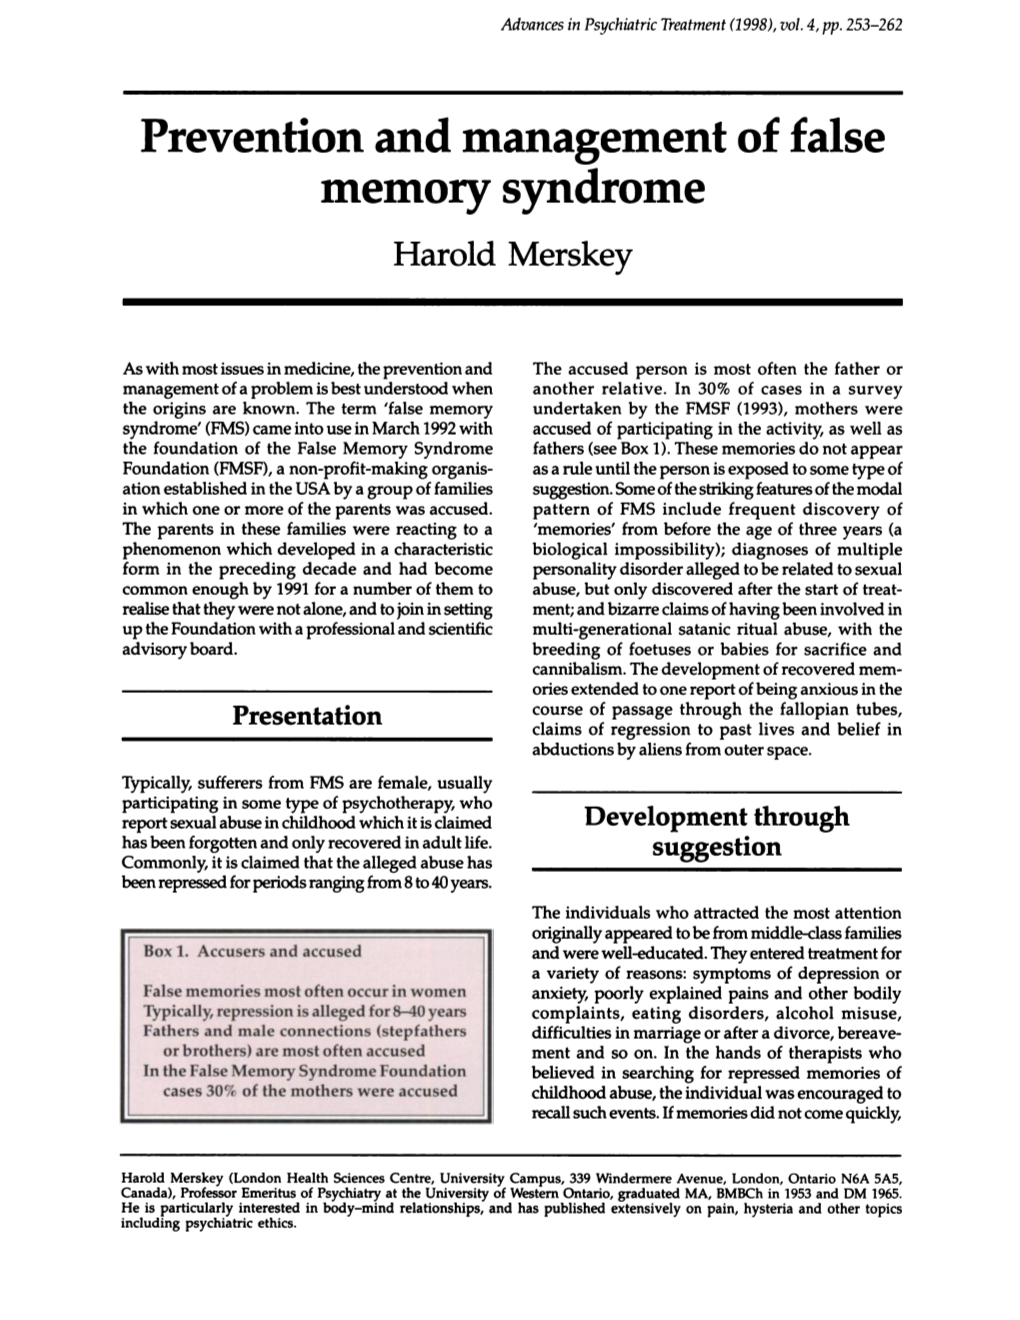 Prevention and Management of False Memory Syndrome Harold Merskey